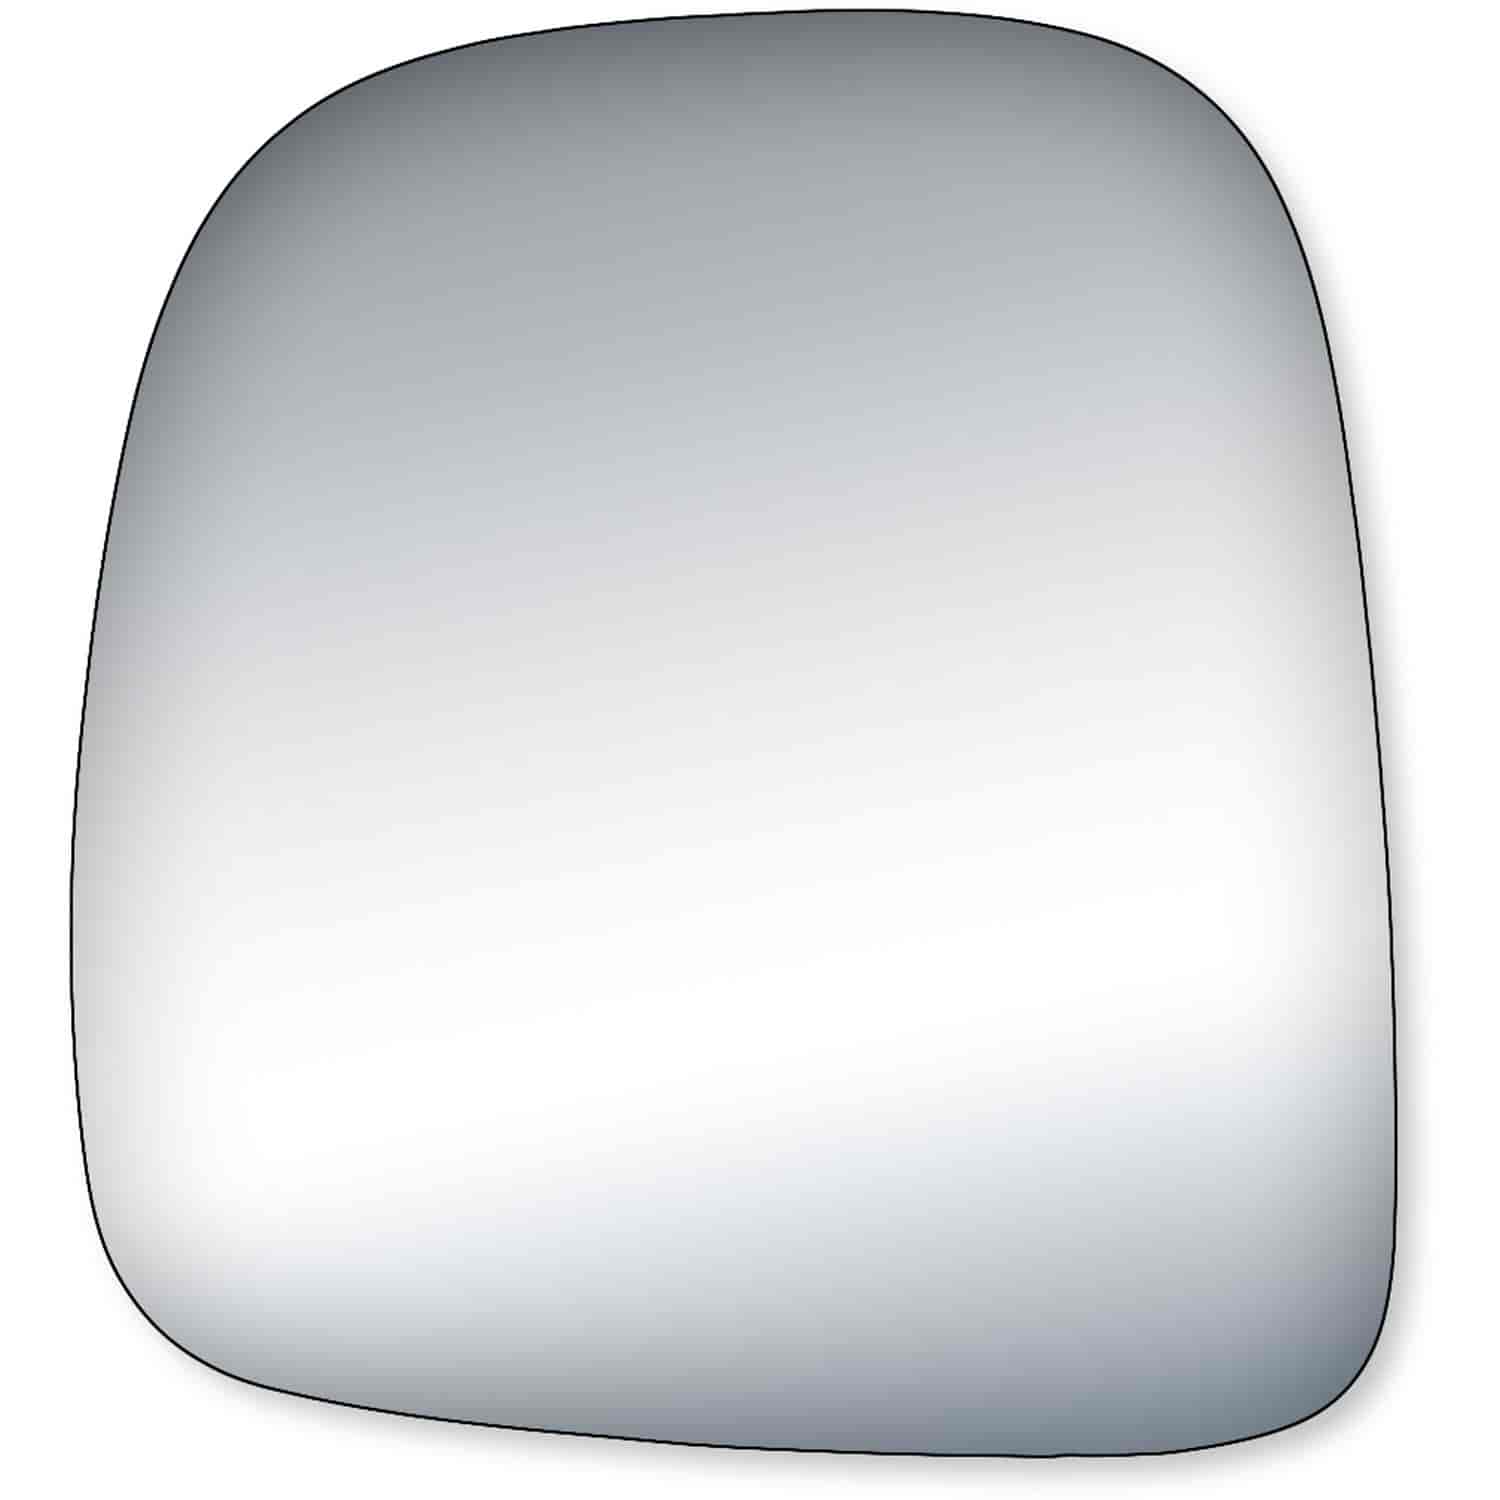 Replacement Glass for 96-02 Express Full Size Van; 96-02 Savana Full Size Van the glass measures 7 7